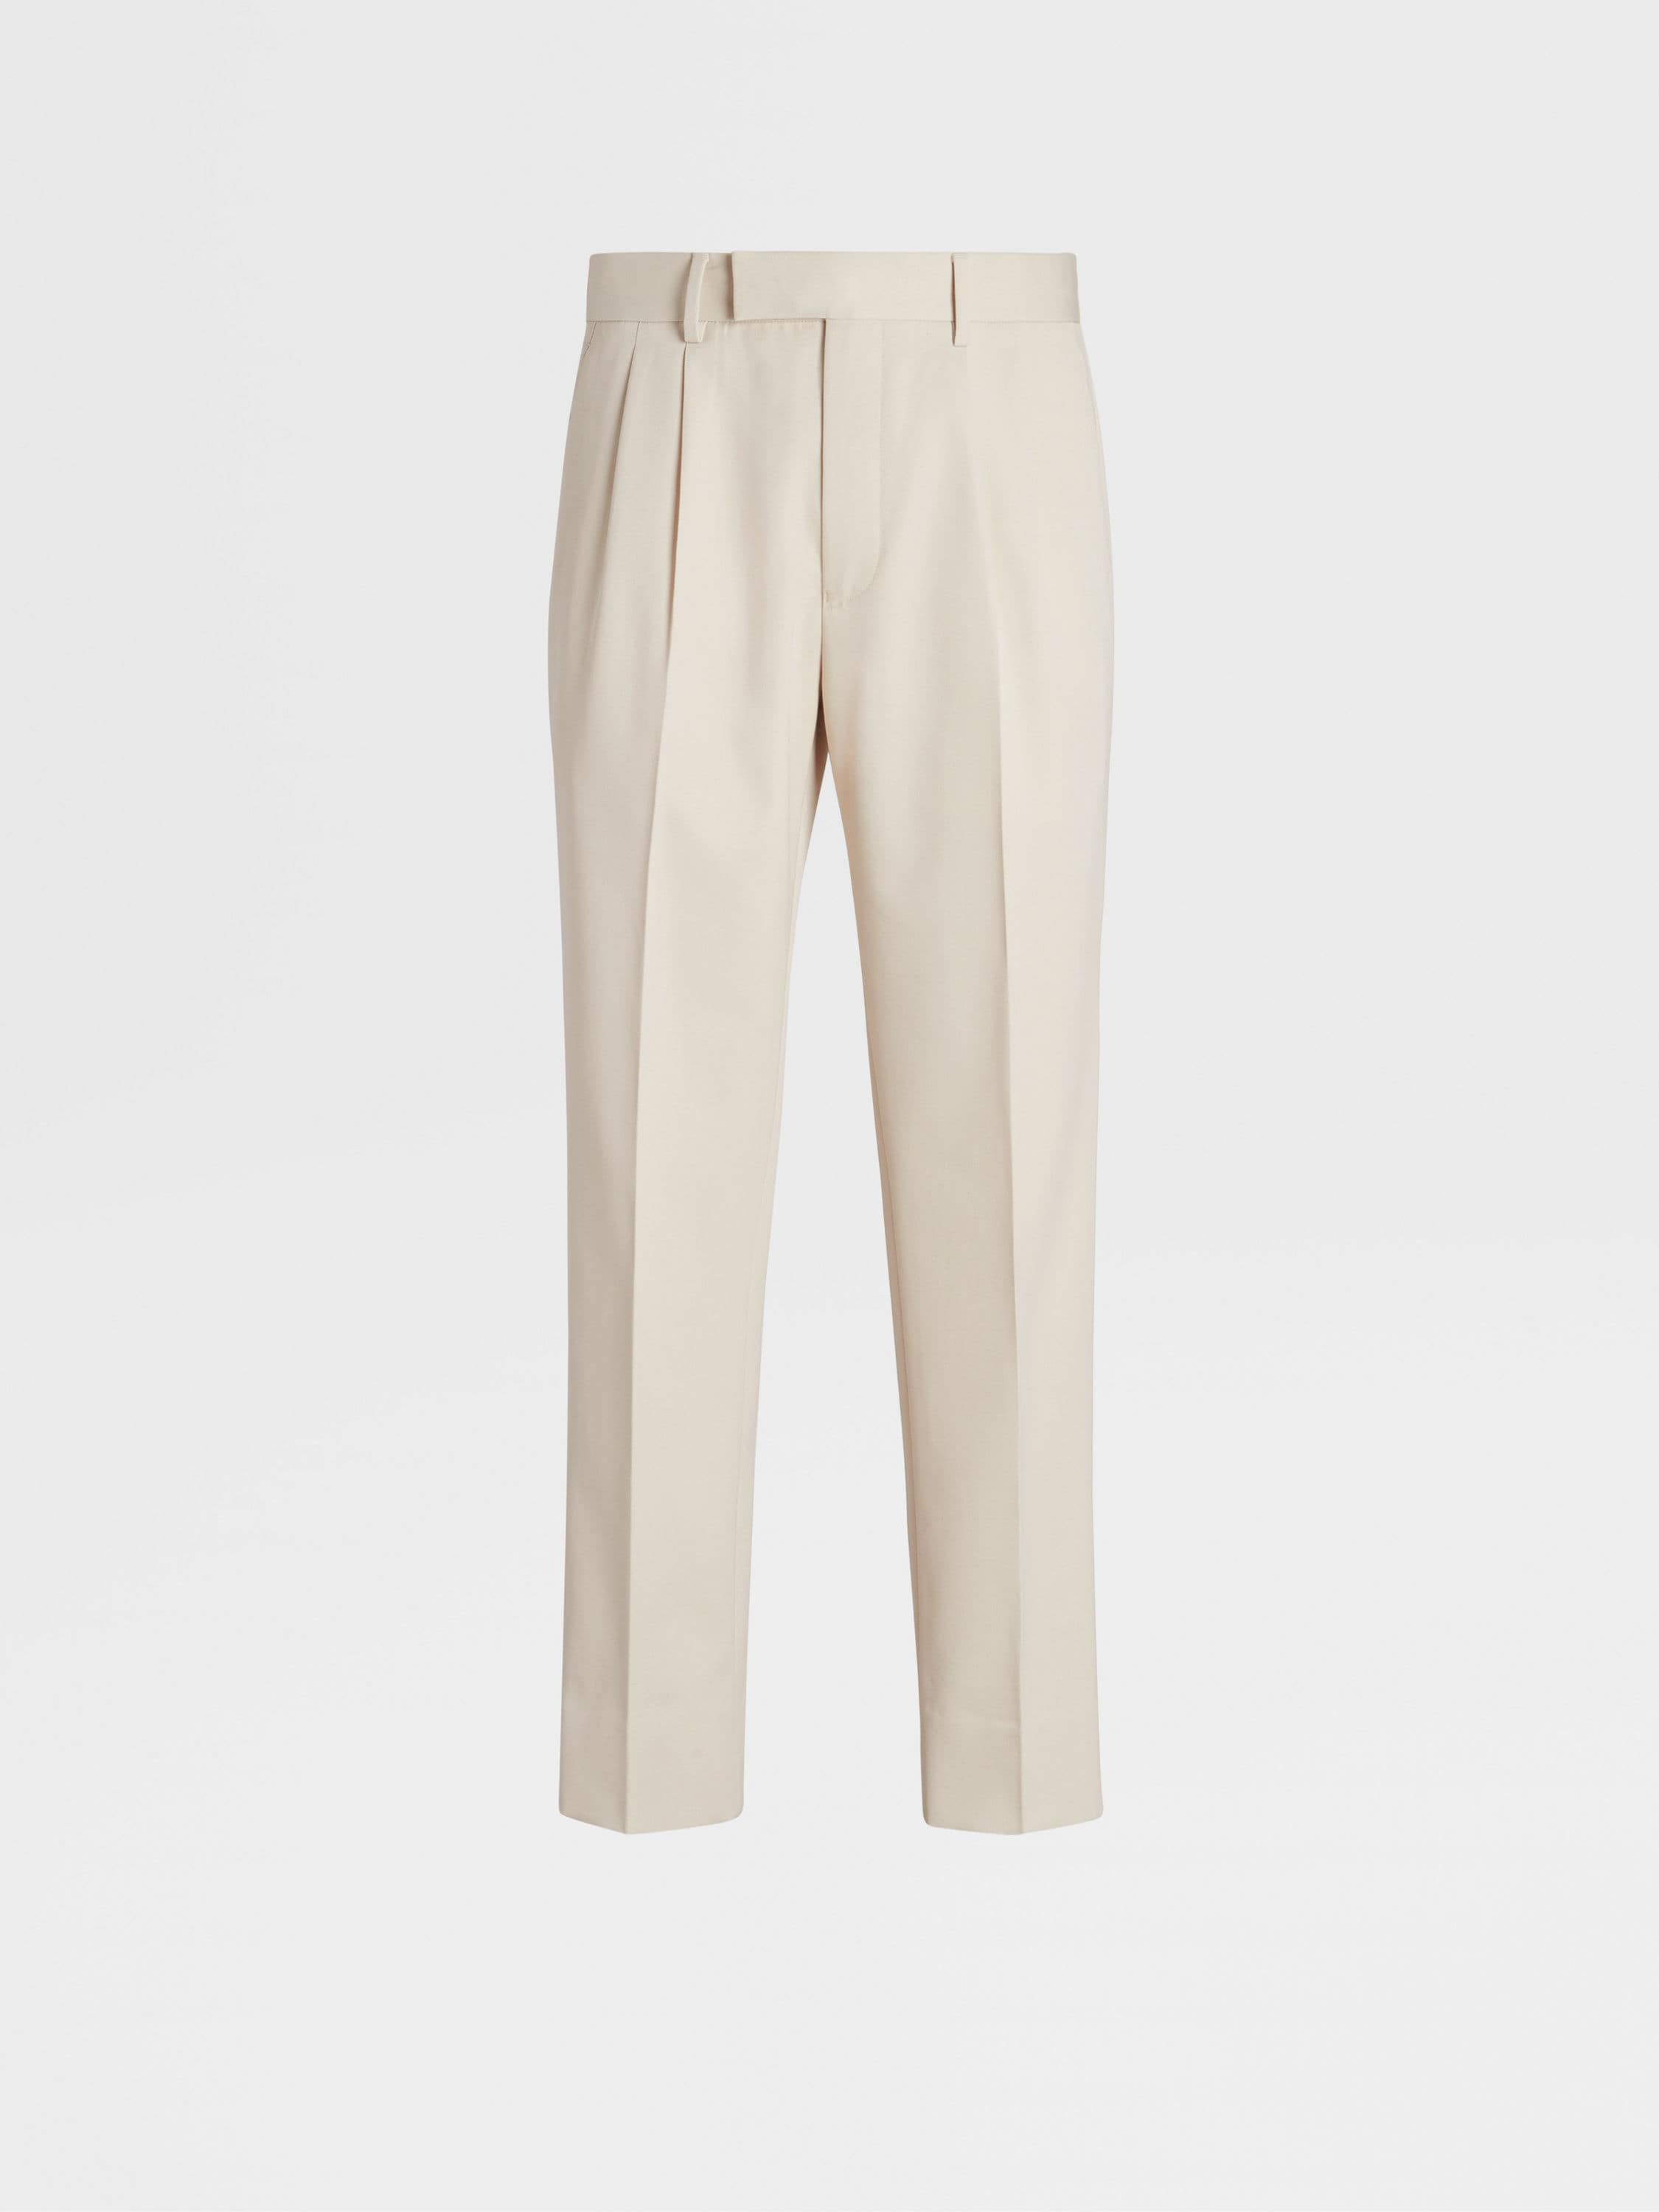 Off White Cotton and Wool Double Pleat Pants FW23 25643711